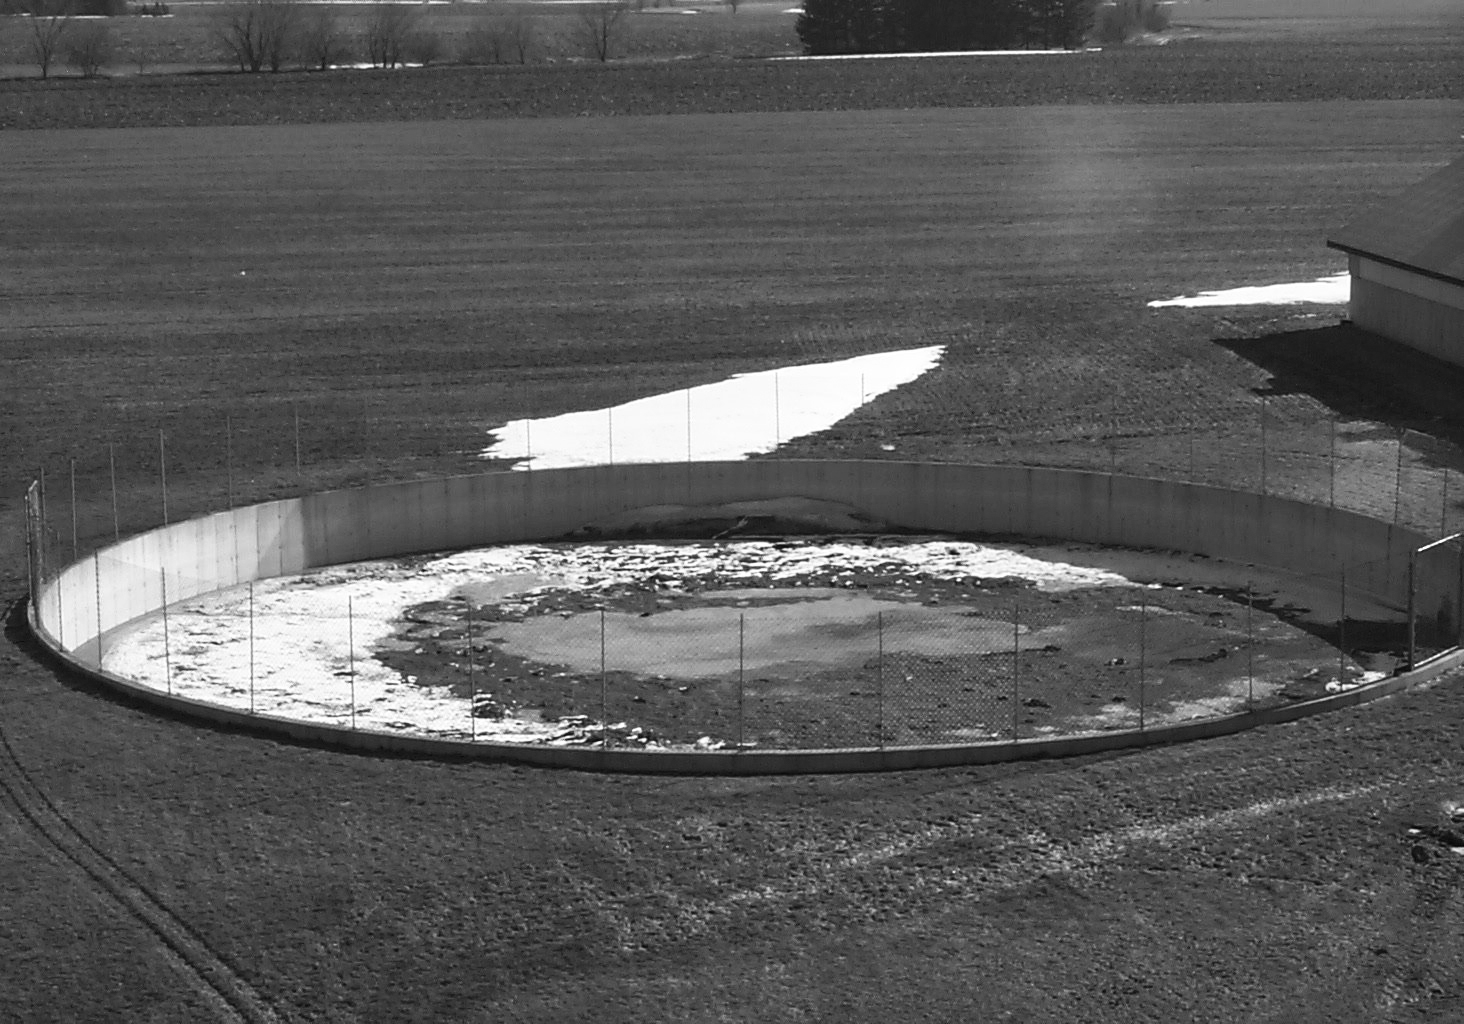 An open, circular, liquid manure tank in a field. The tank is surrounded by steel fencing.